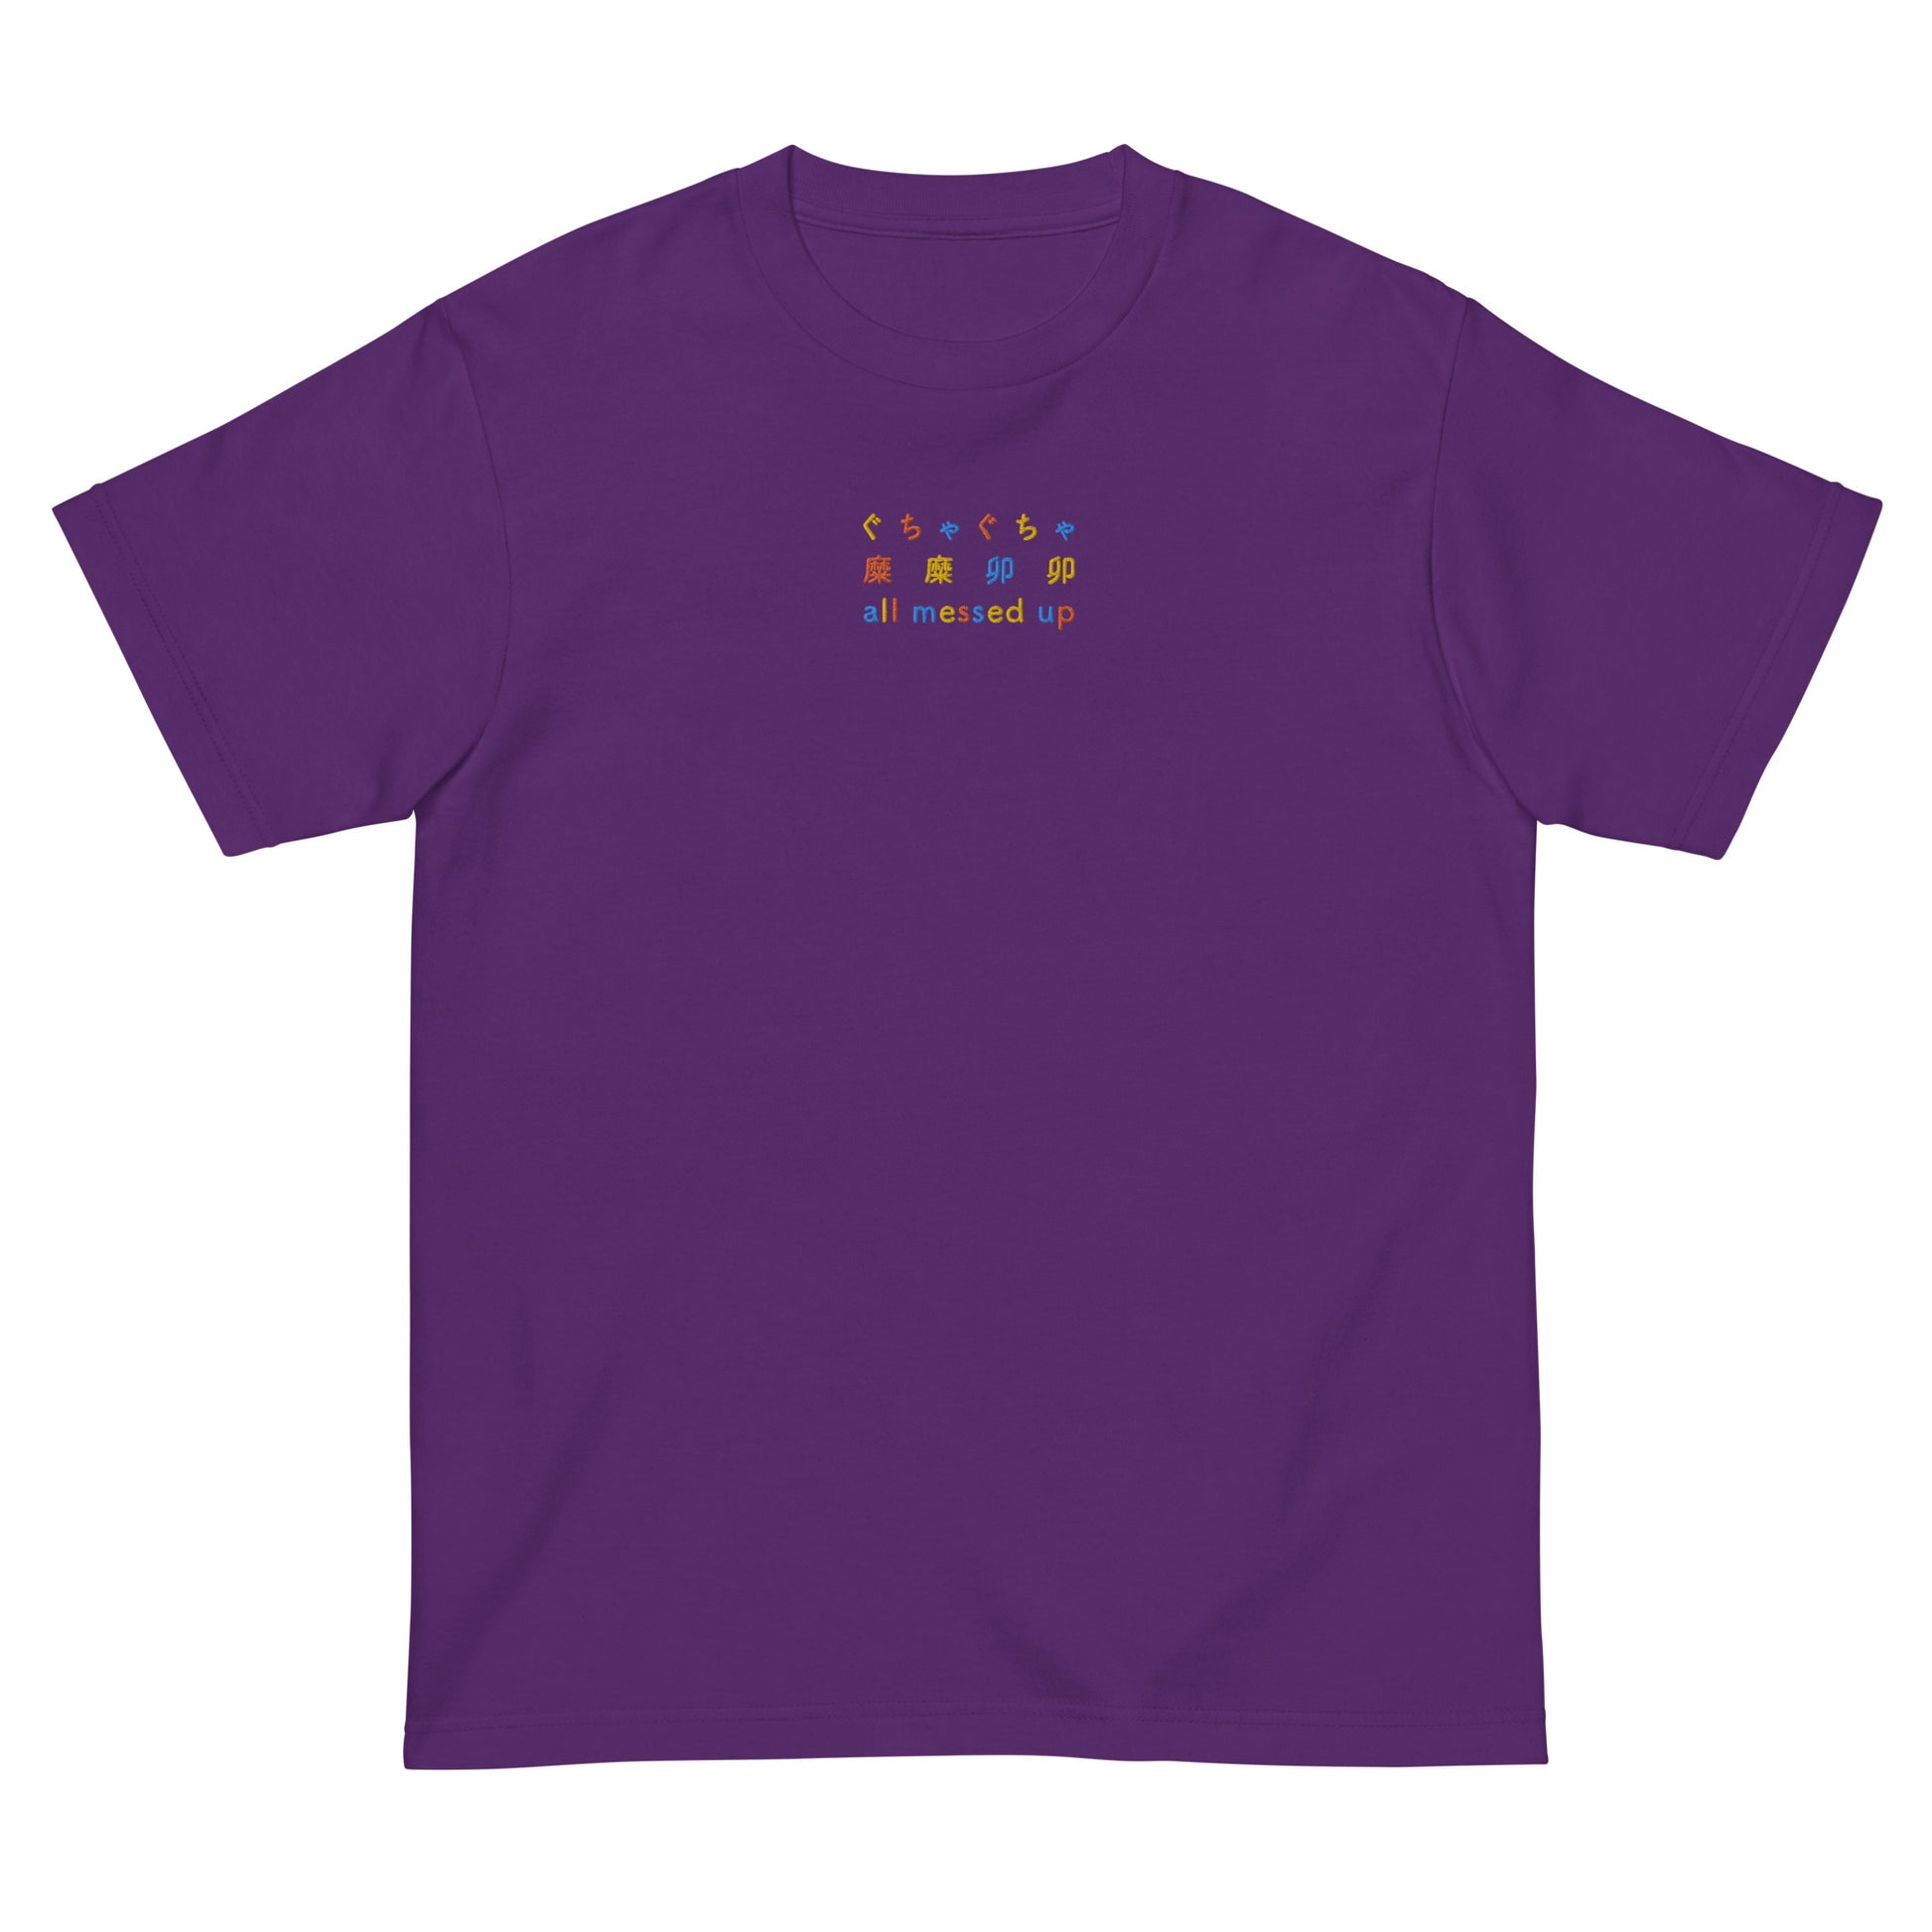 Purple High Quality Tee - Front Design with an Yellow,Orange,Blue Embroidery "All Messed Up" in Japanese,Chinese and English